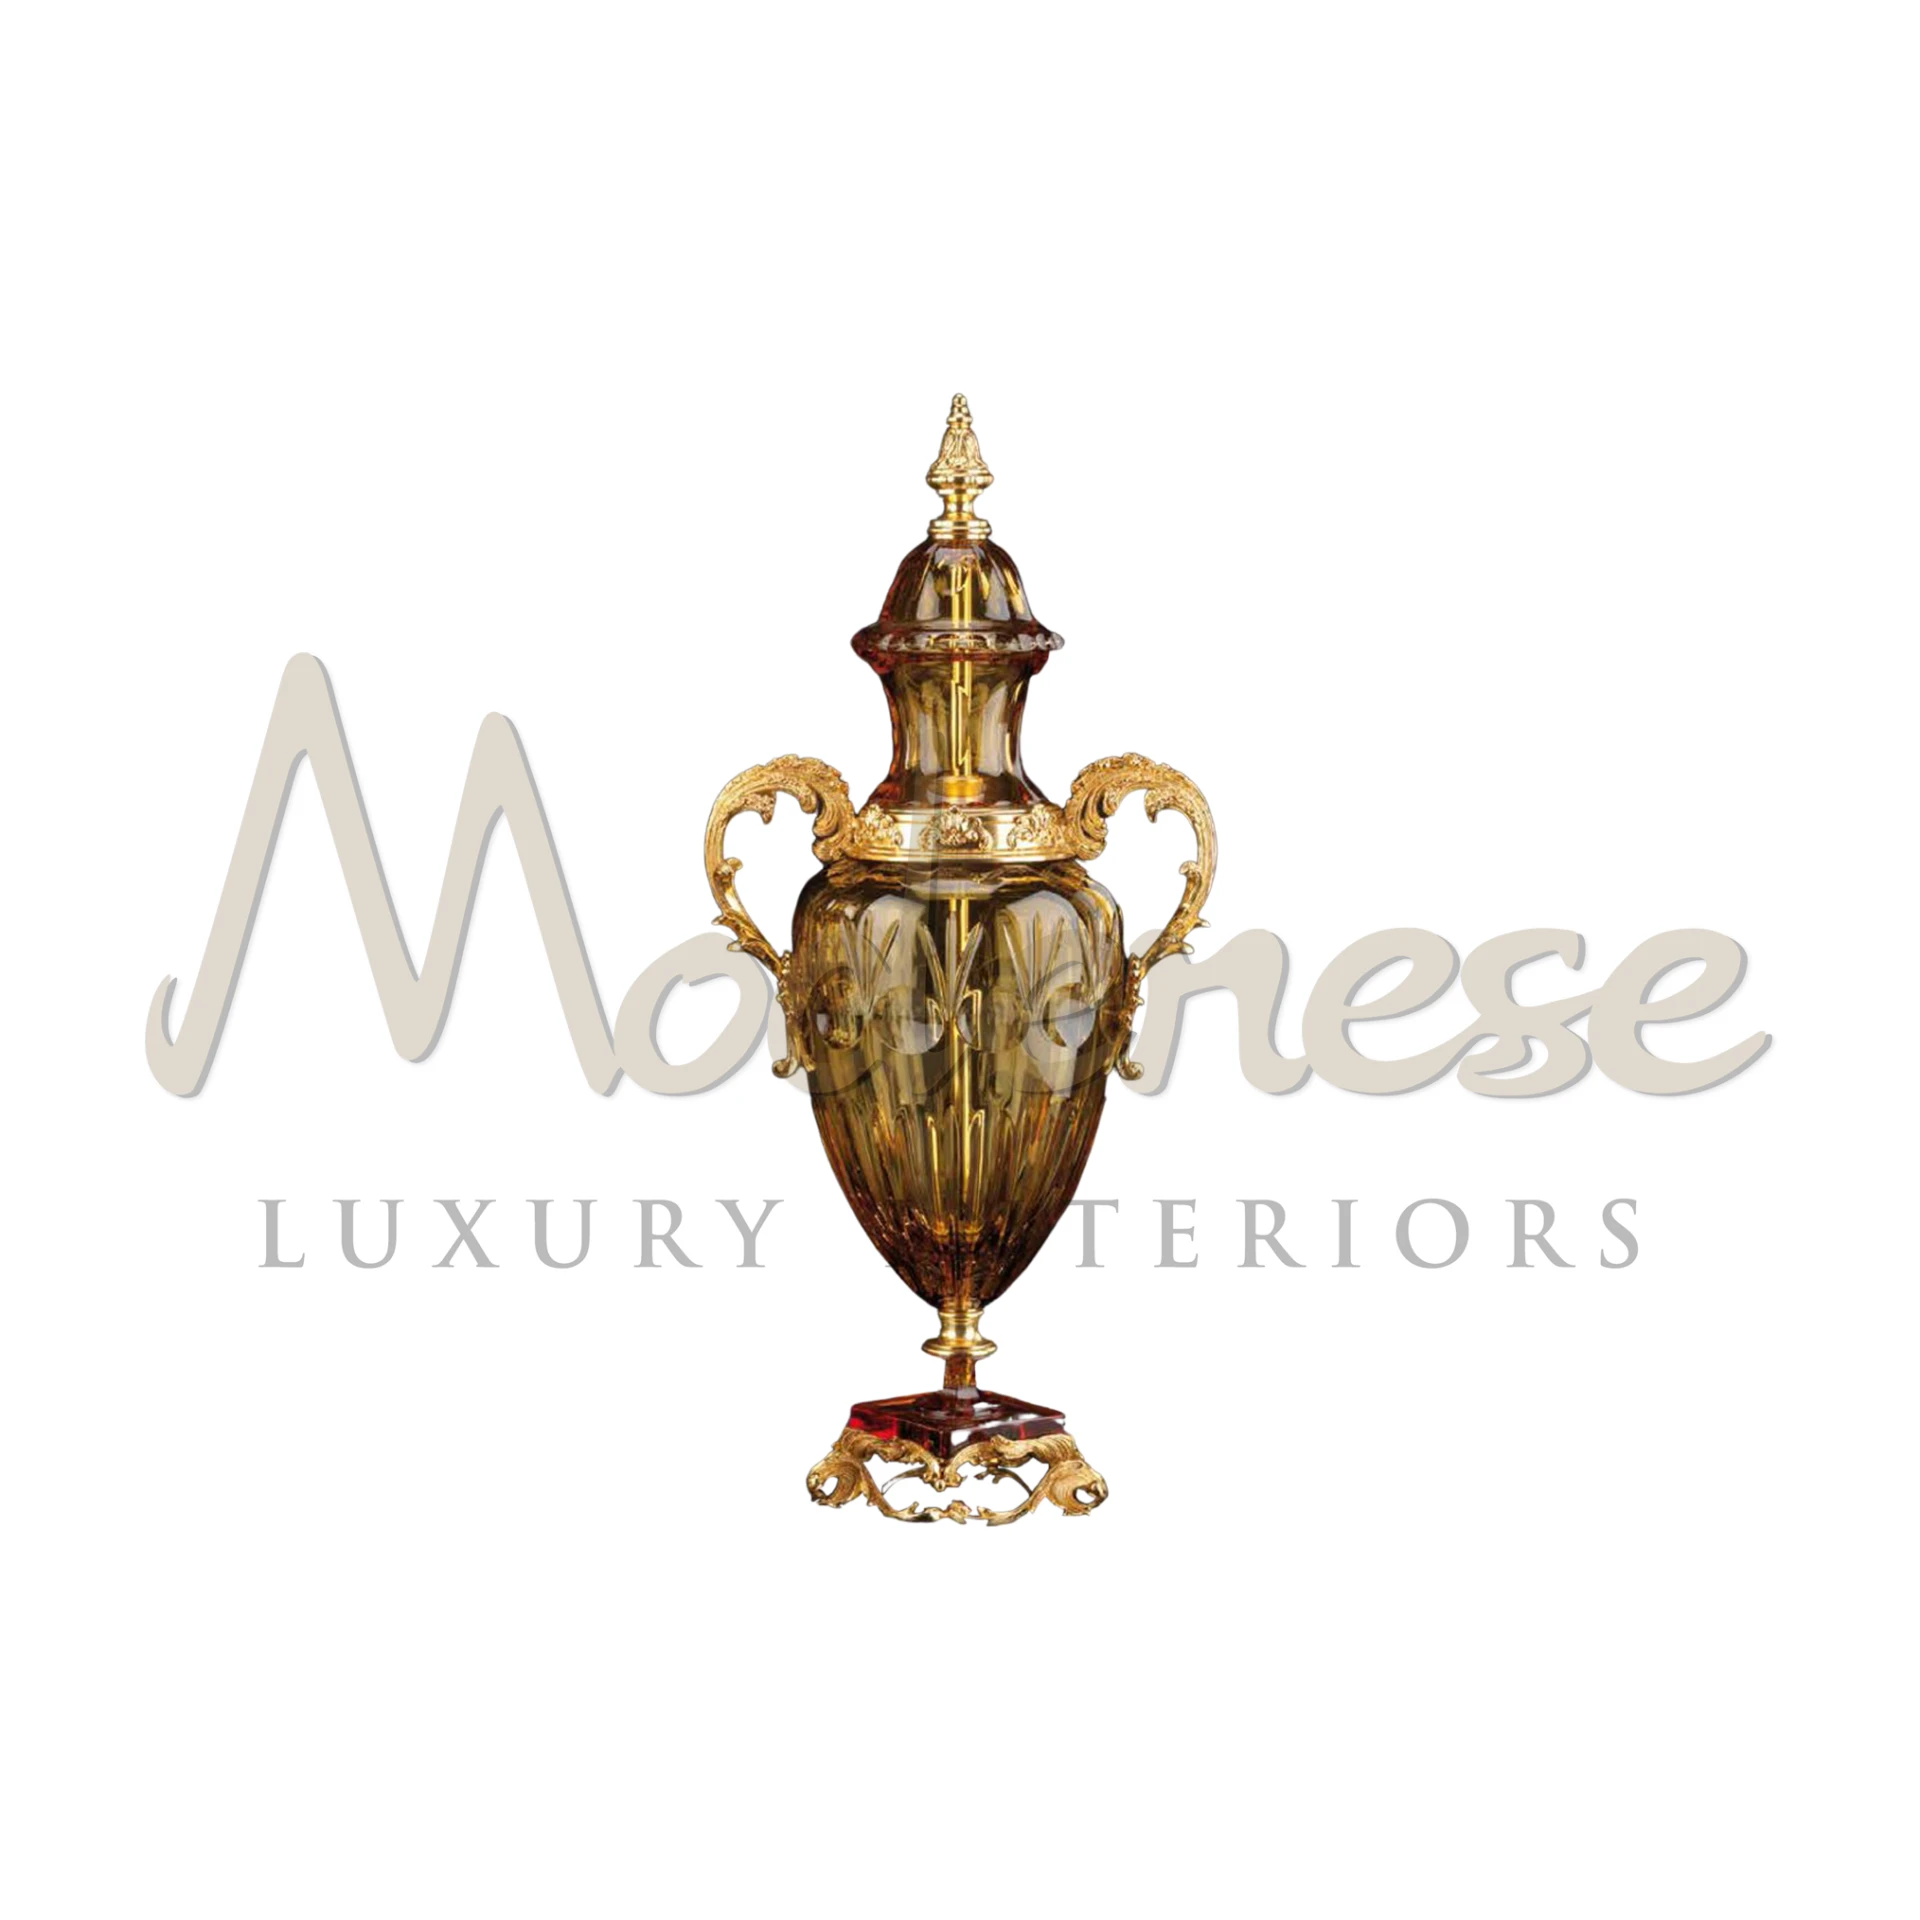 Amber Imperial Amphora with handles, a Modenese Furniture classic, showcasing hand-blown glass and gold-leaf detail.